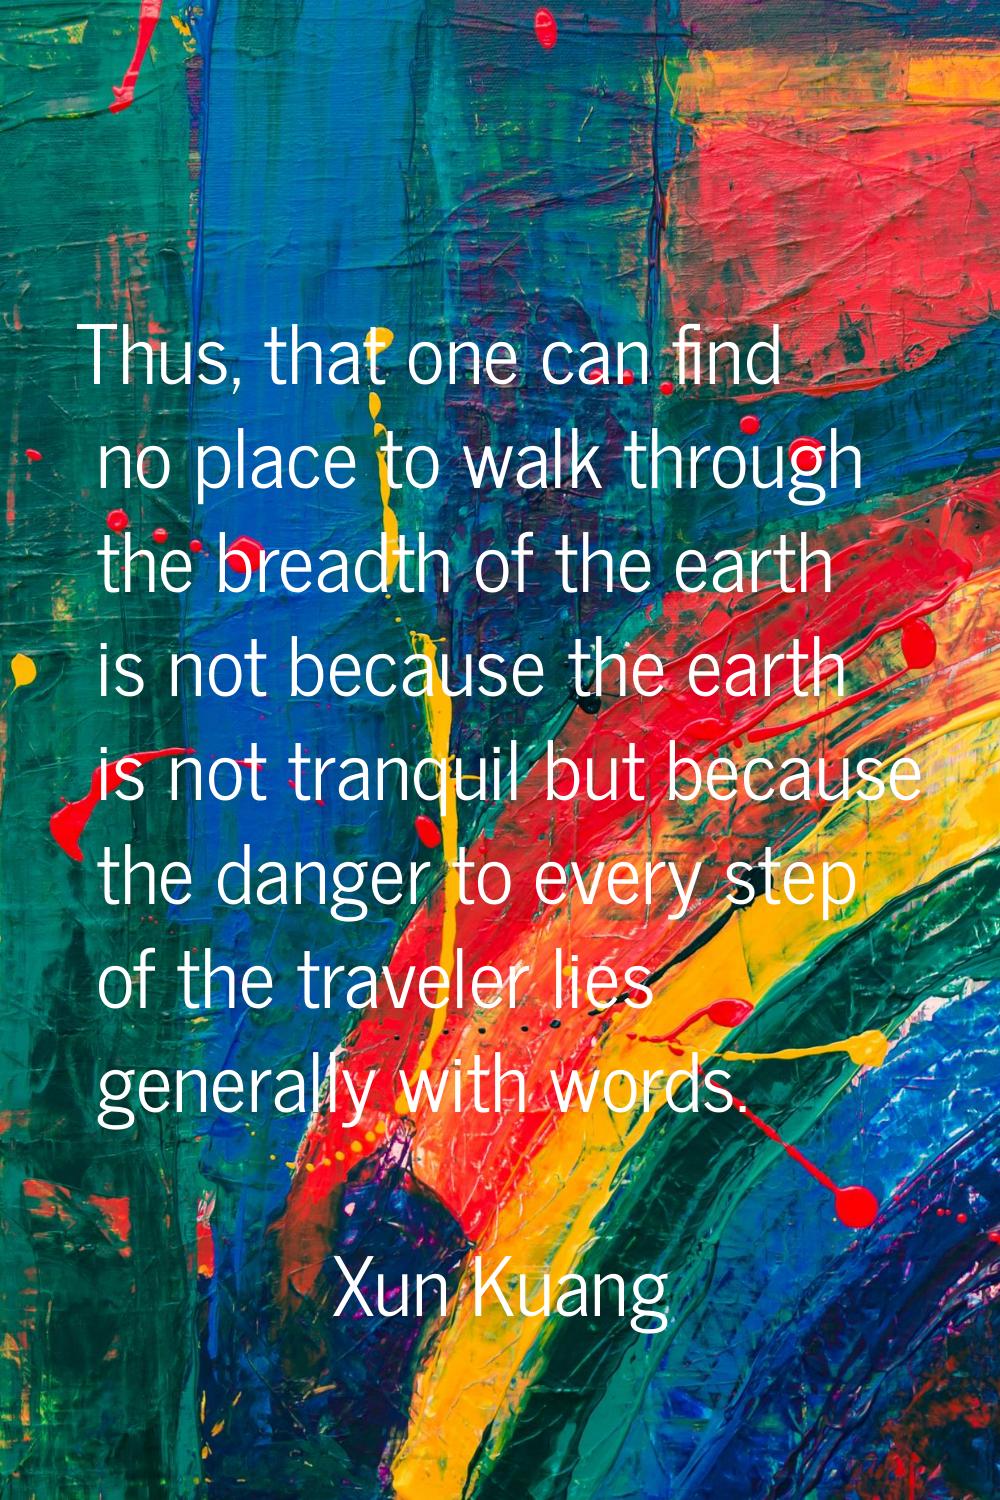 Thus, that one can find no place to walk through the breadth of the earth is not because the earth 